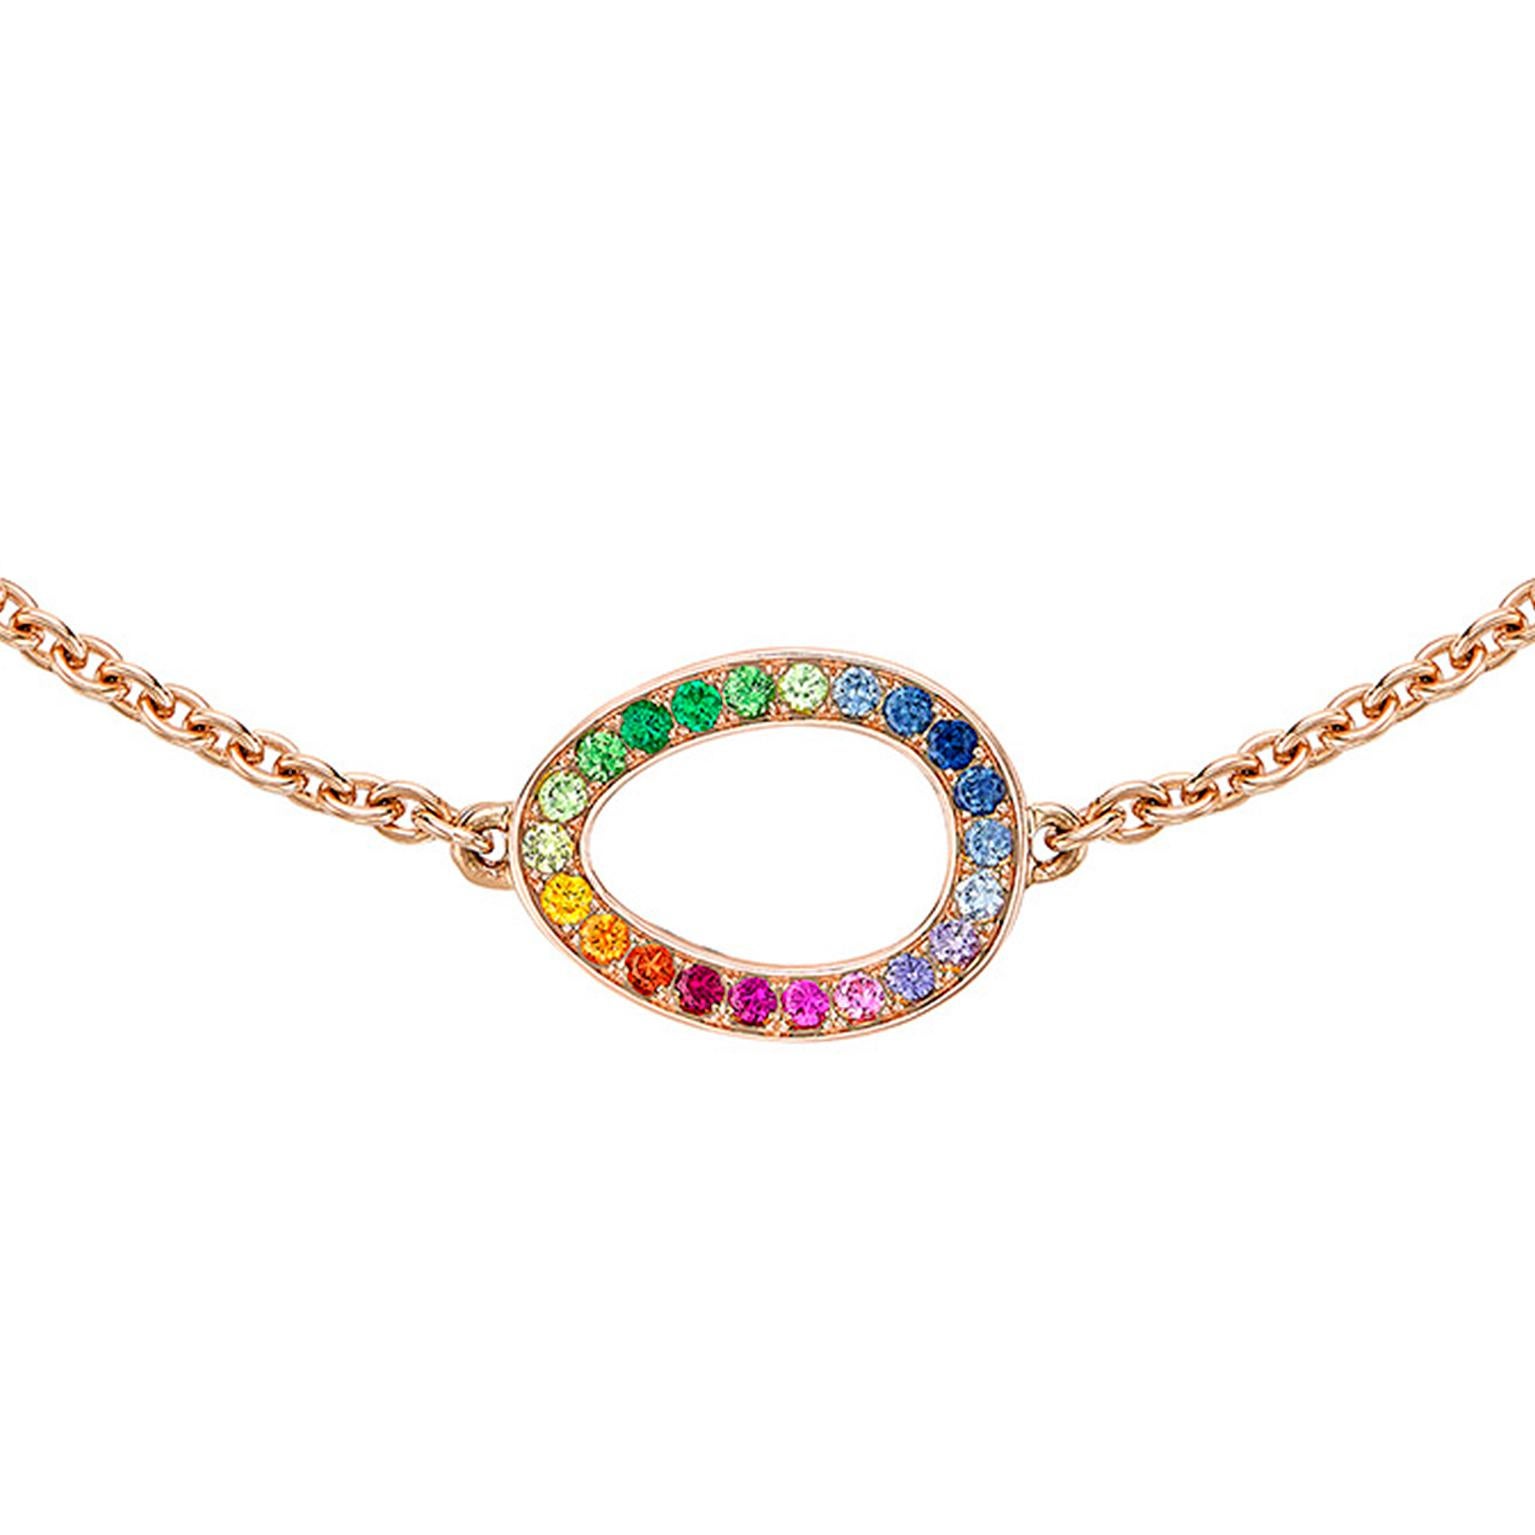 The Sasha pieces depicts the iconic egg silhouette in a contemporary way. This elegant Colours of Love Sasha Rose Gold Rainbow Egg Chain Bracelet features an array of emeralds, sapphires, garnets, rubies and tsavorites. The bracelet is set in 18kt